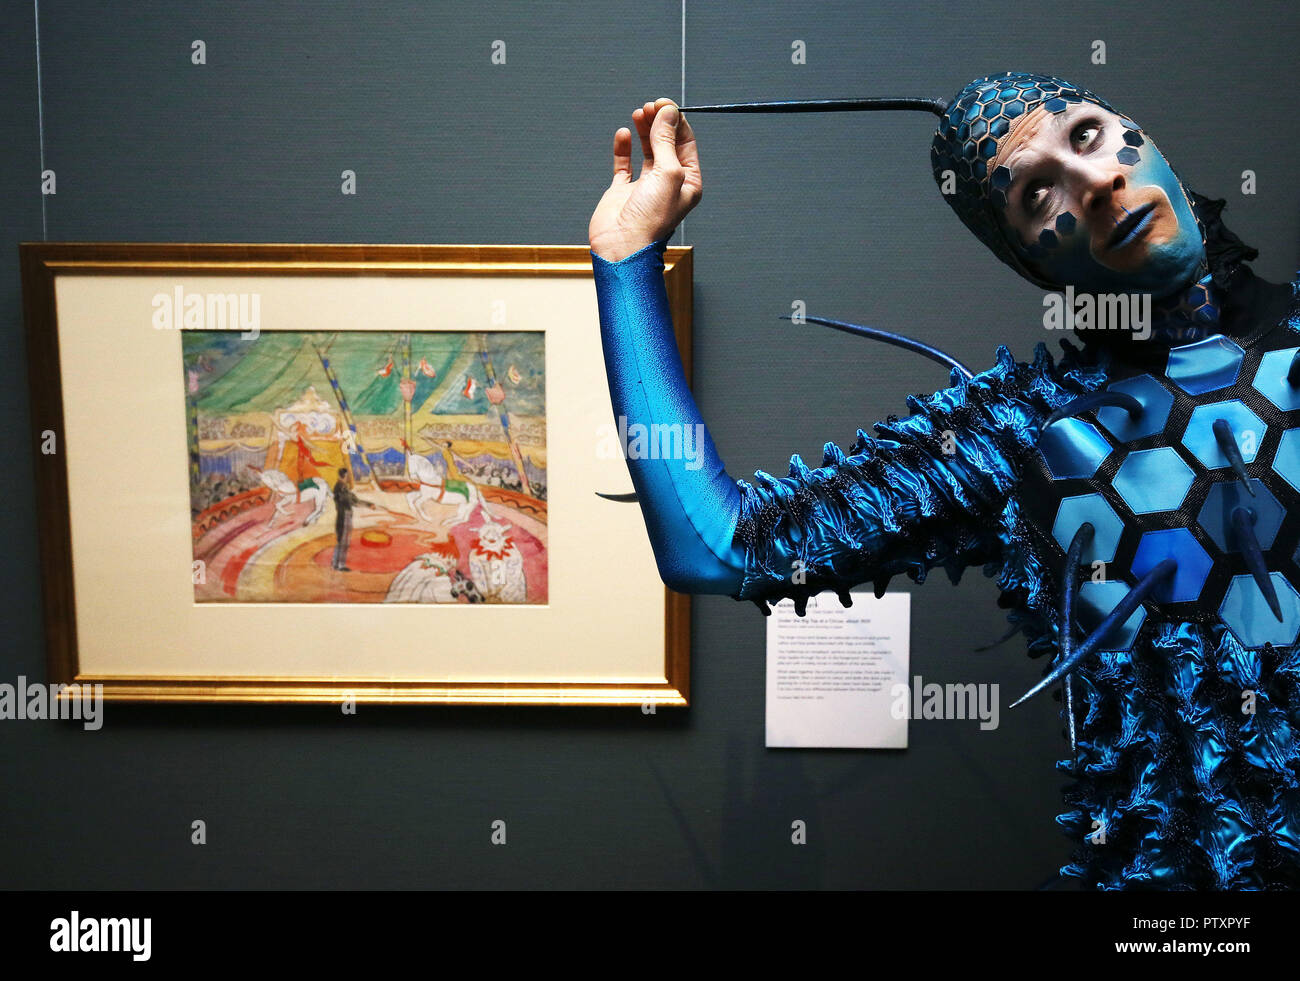 Jan Dutler 'The Foreigner' from the current Cirque du Soleil show OVO during a visit to the National Gallery of Ireland to view the Gallery's exhibition Circus250: Art of the Show. Stock Photo